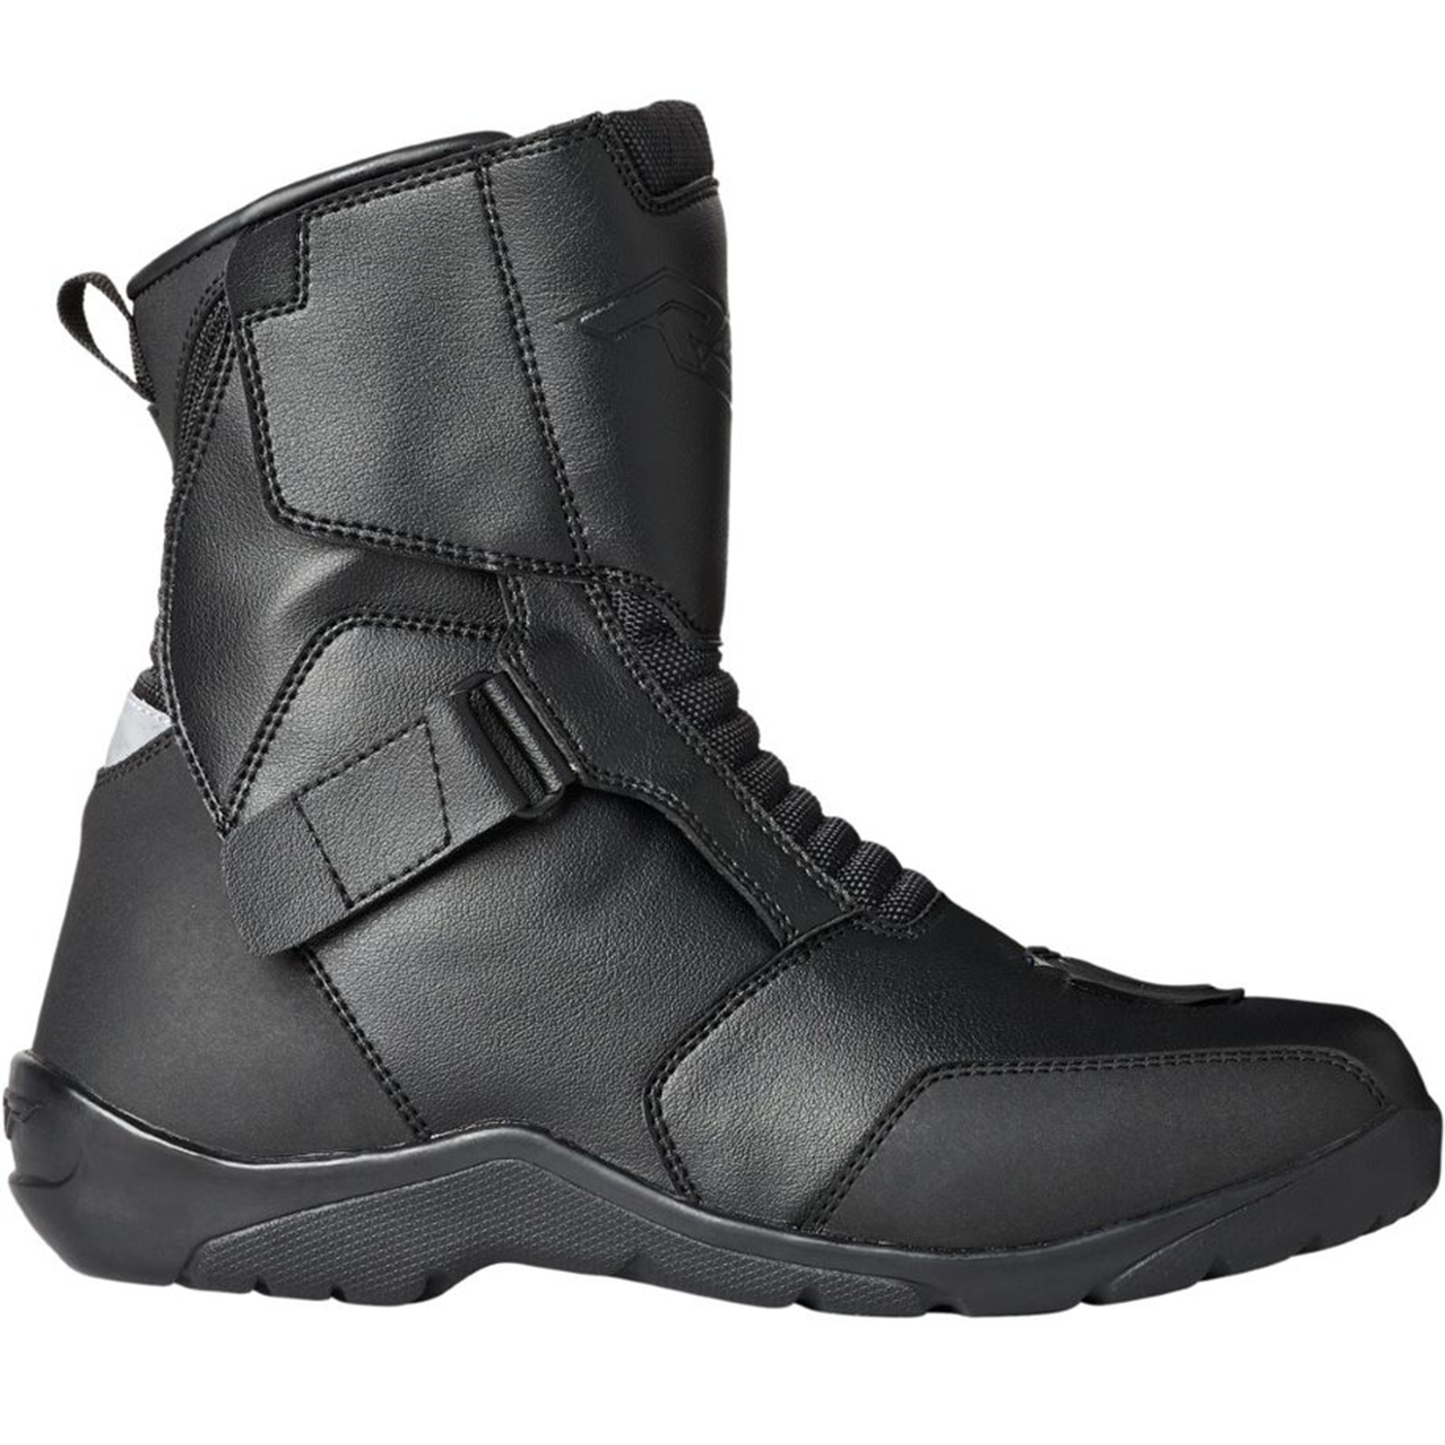 RST Axiom Mid (CE) Waterproof Boots - Black